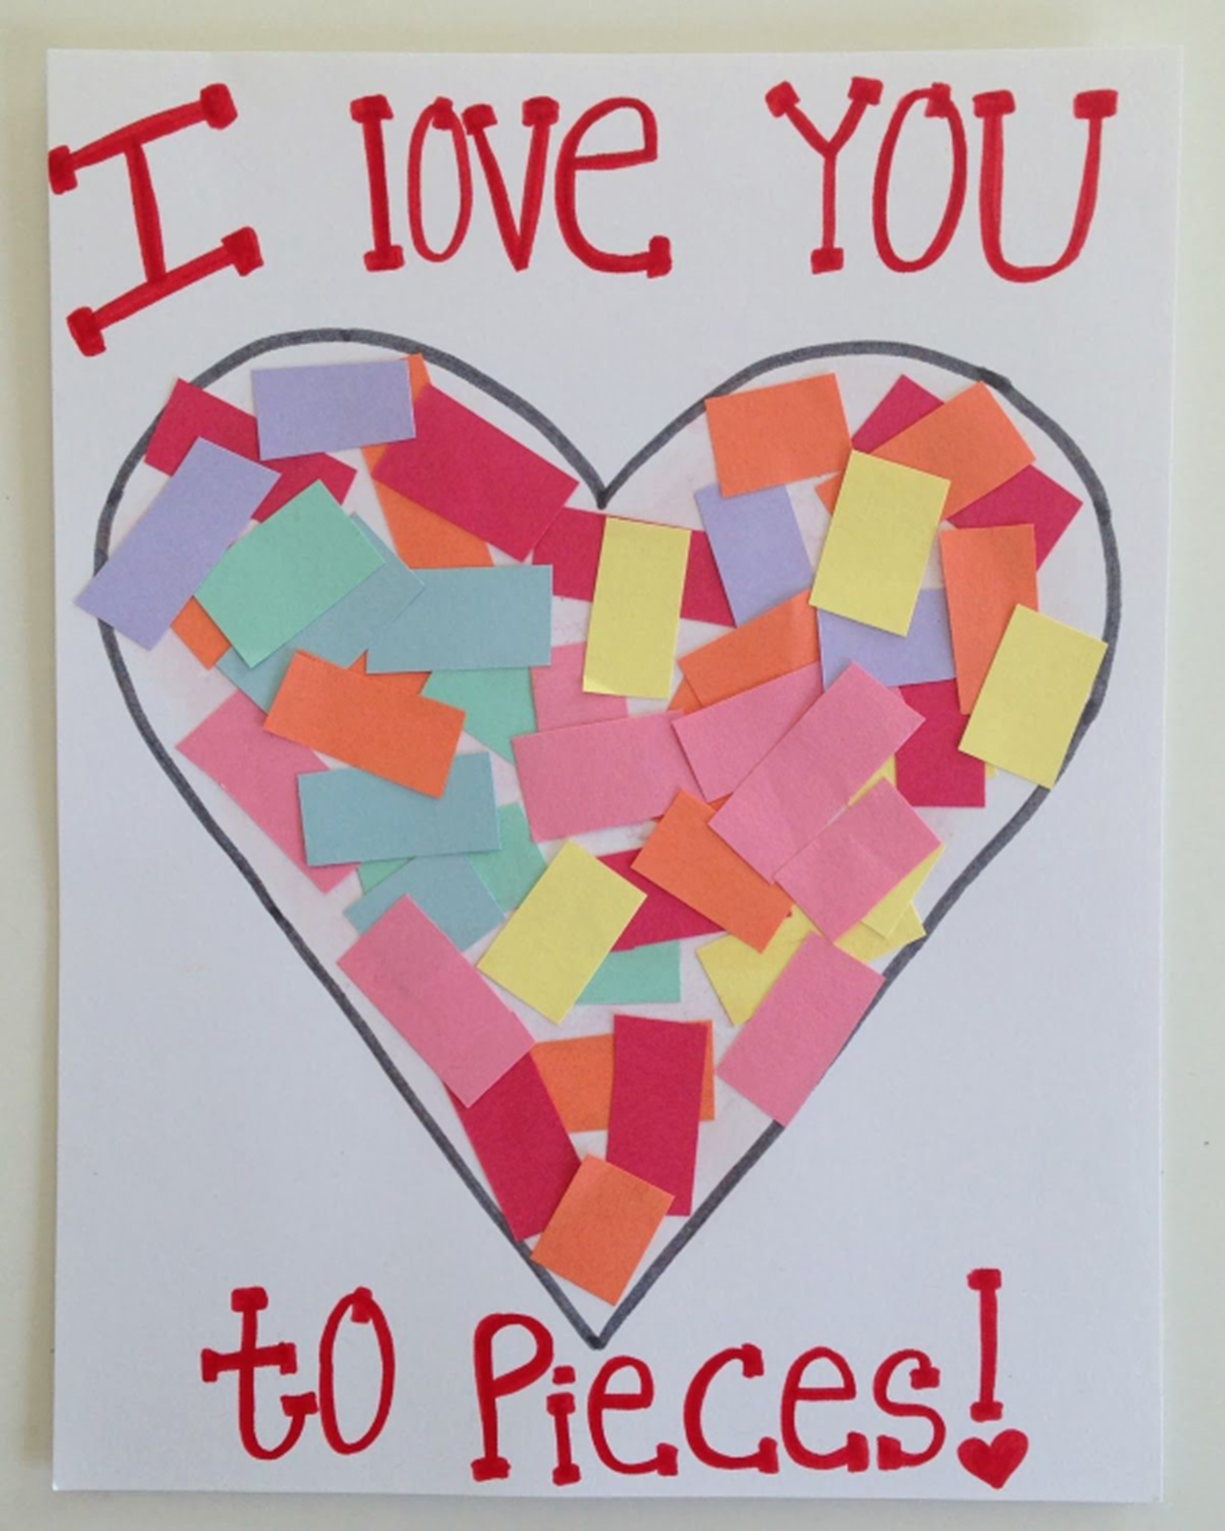 Card with a heart filled in with small pieces of colored paper